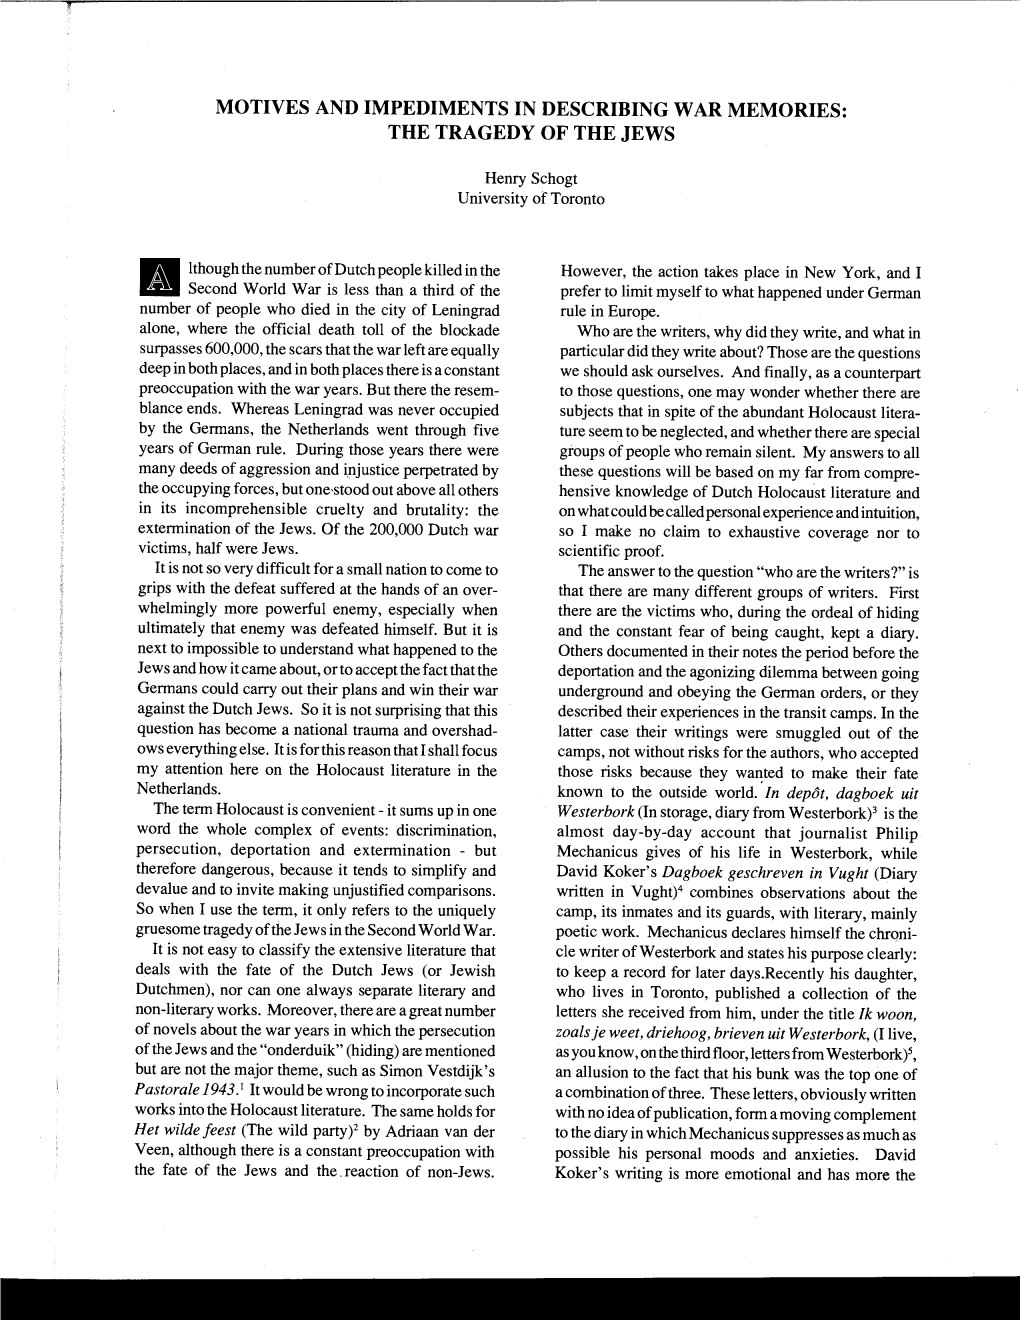 Motives and Impediments in Describing War Memories: the Tragedy of the Jews , Page 3